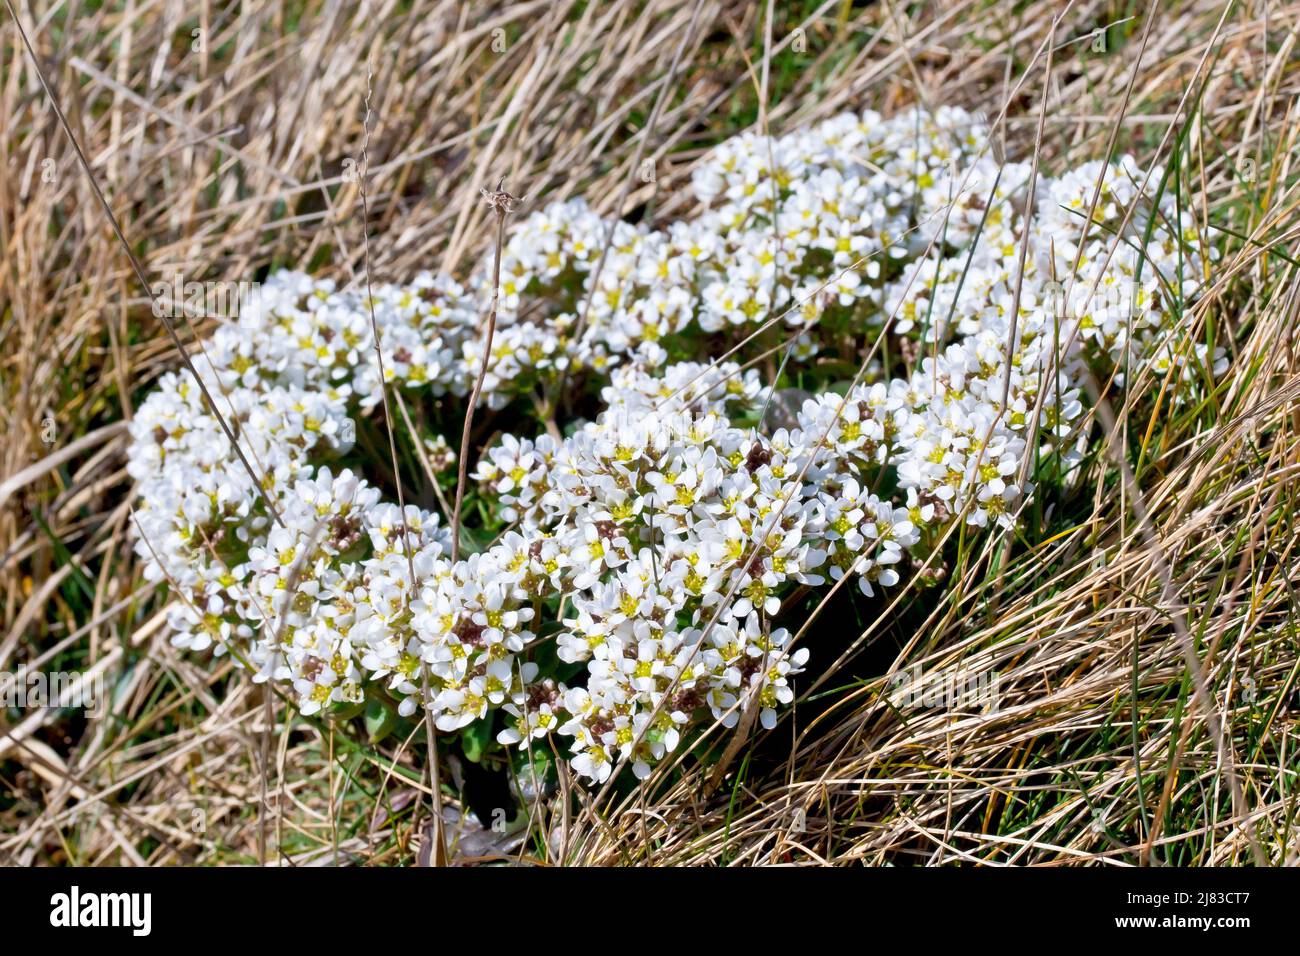 Common Scurvy-grass (cochlearia officinalis), close up showing the white flowered plant growing through the dead grass of a cliff-top path in spring. Stock Photo